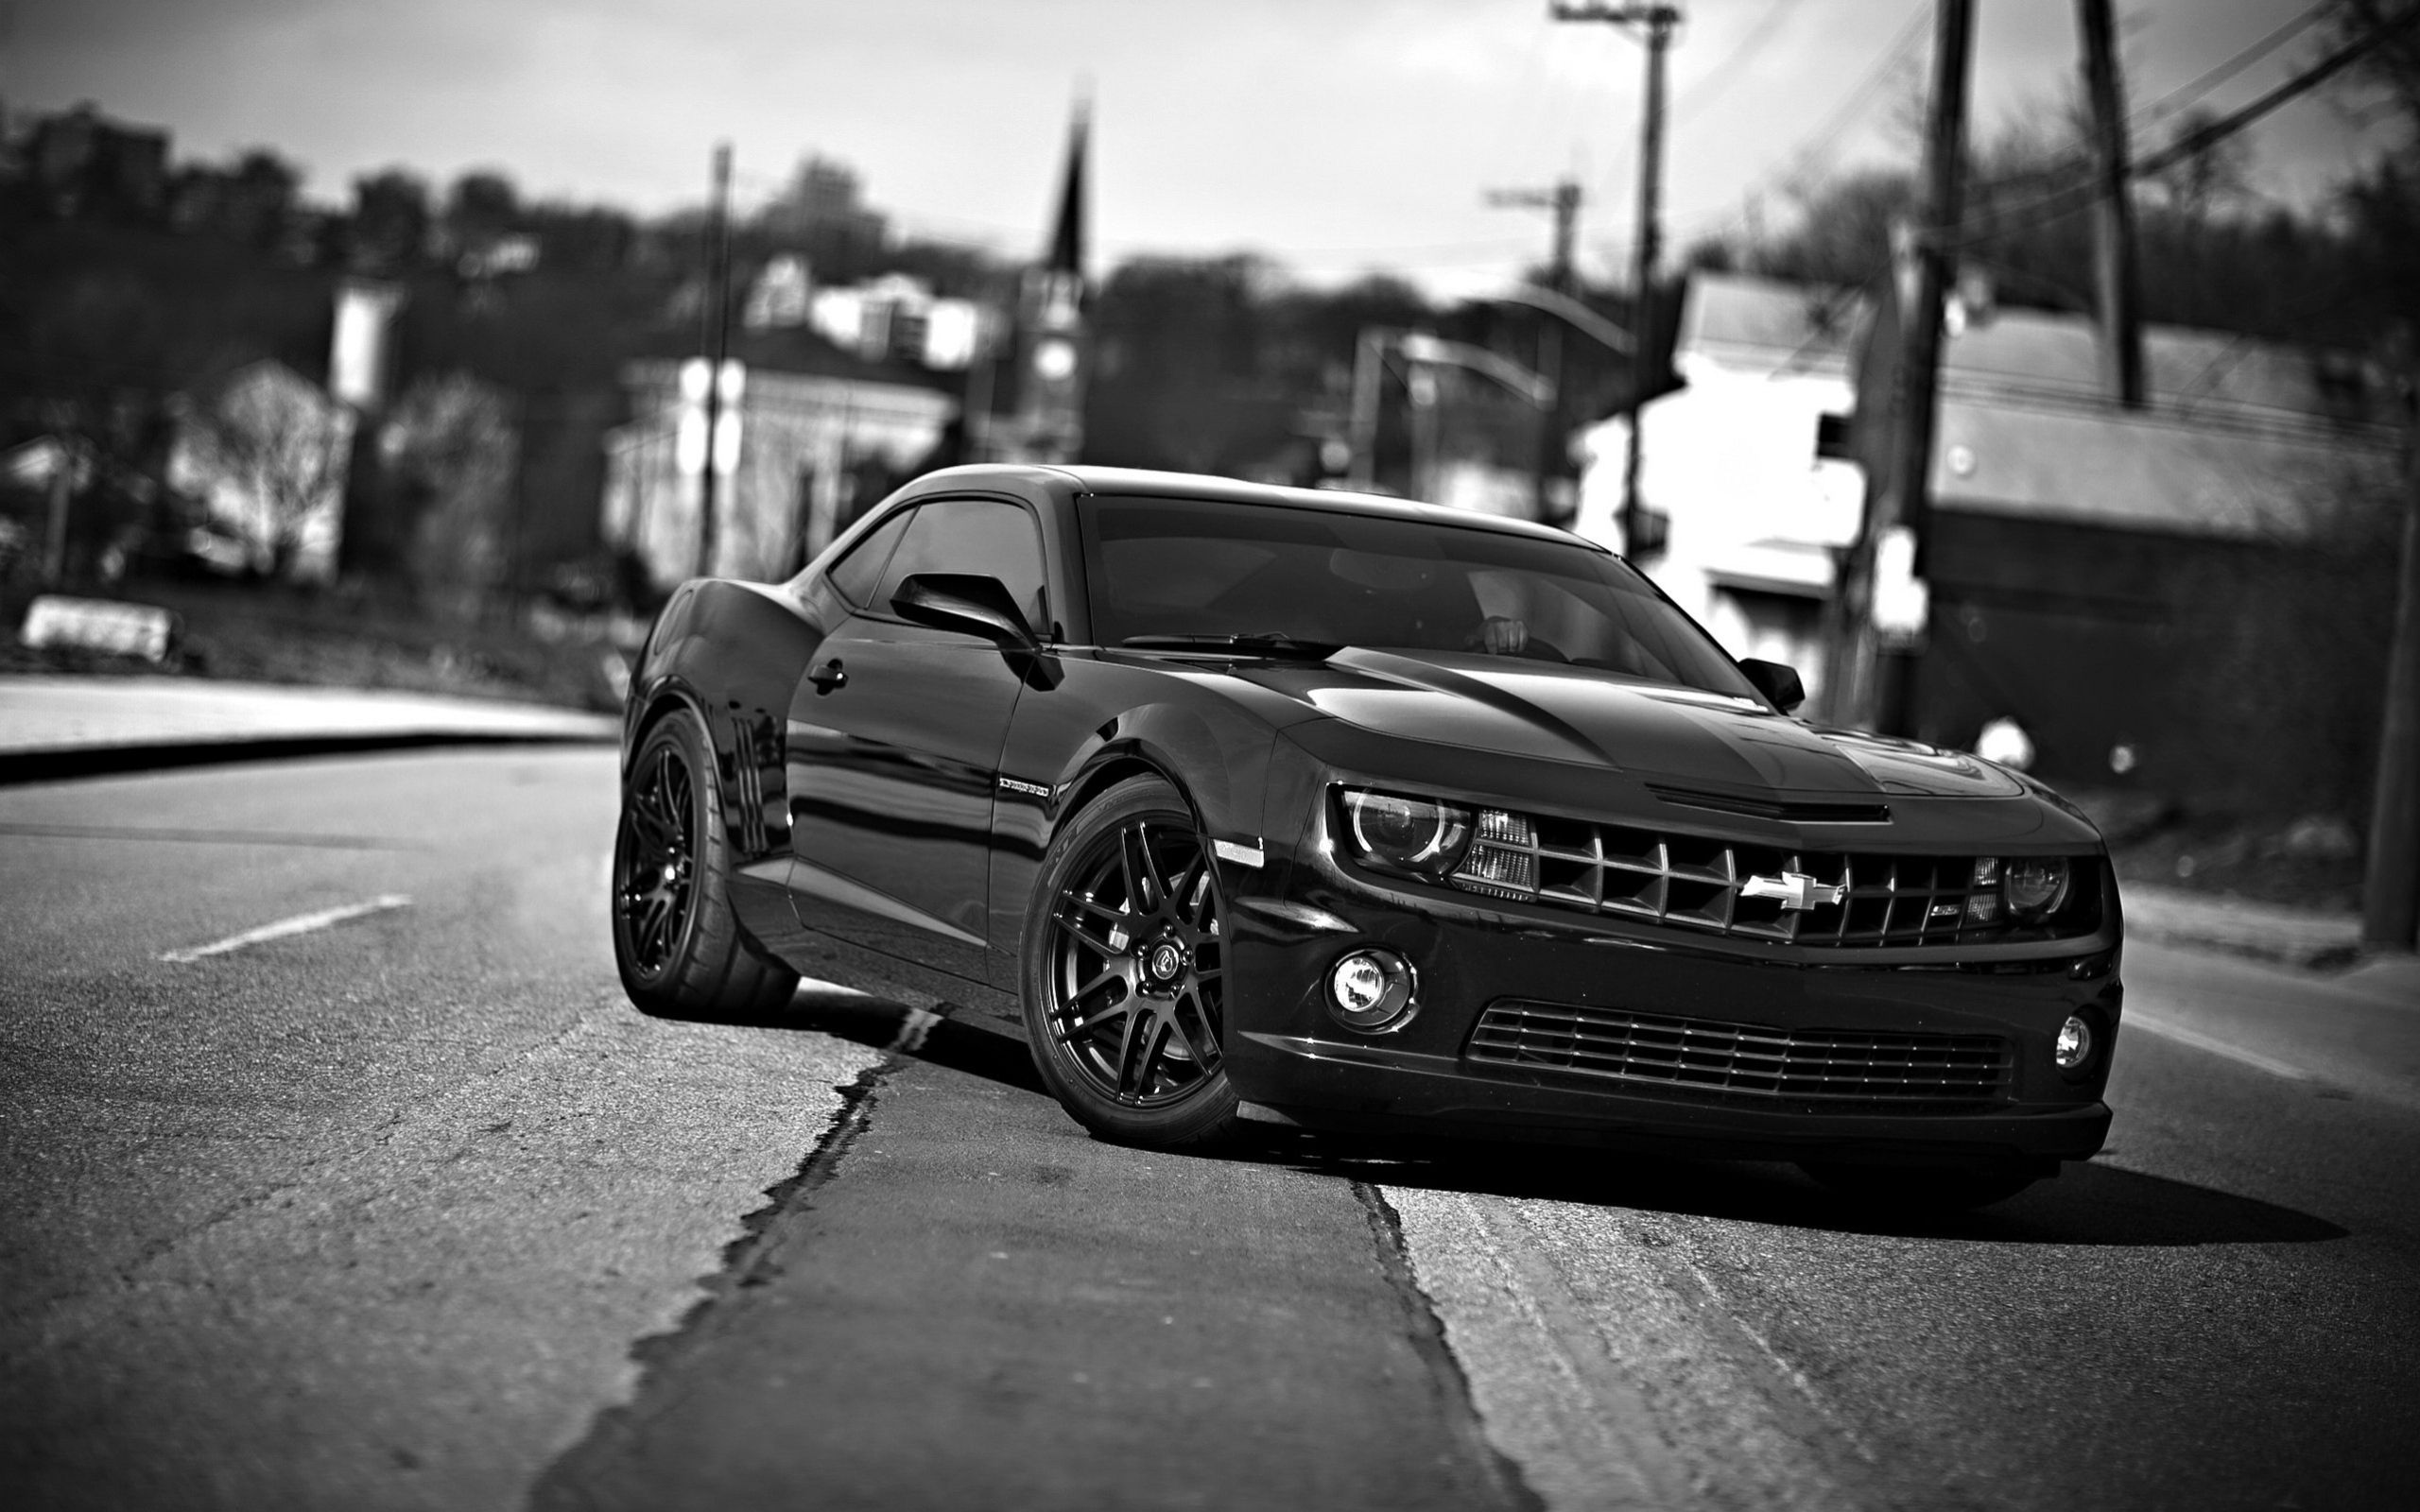 auto, chevrolet camaro, chevrolet, cars, front view, bw, chb